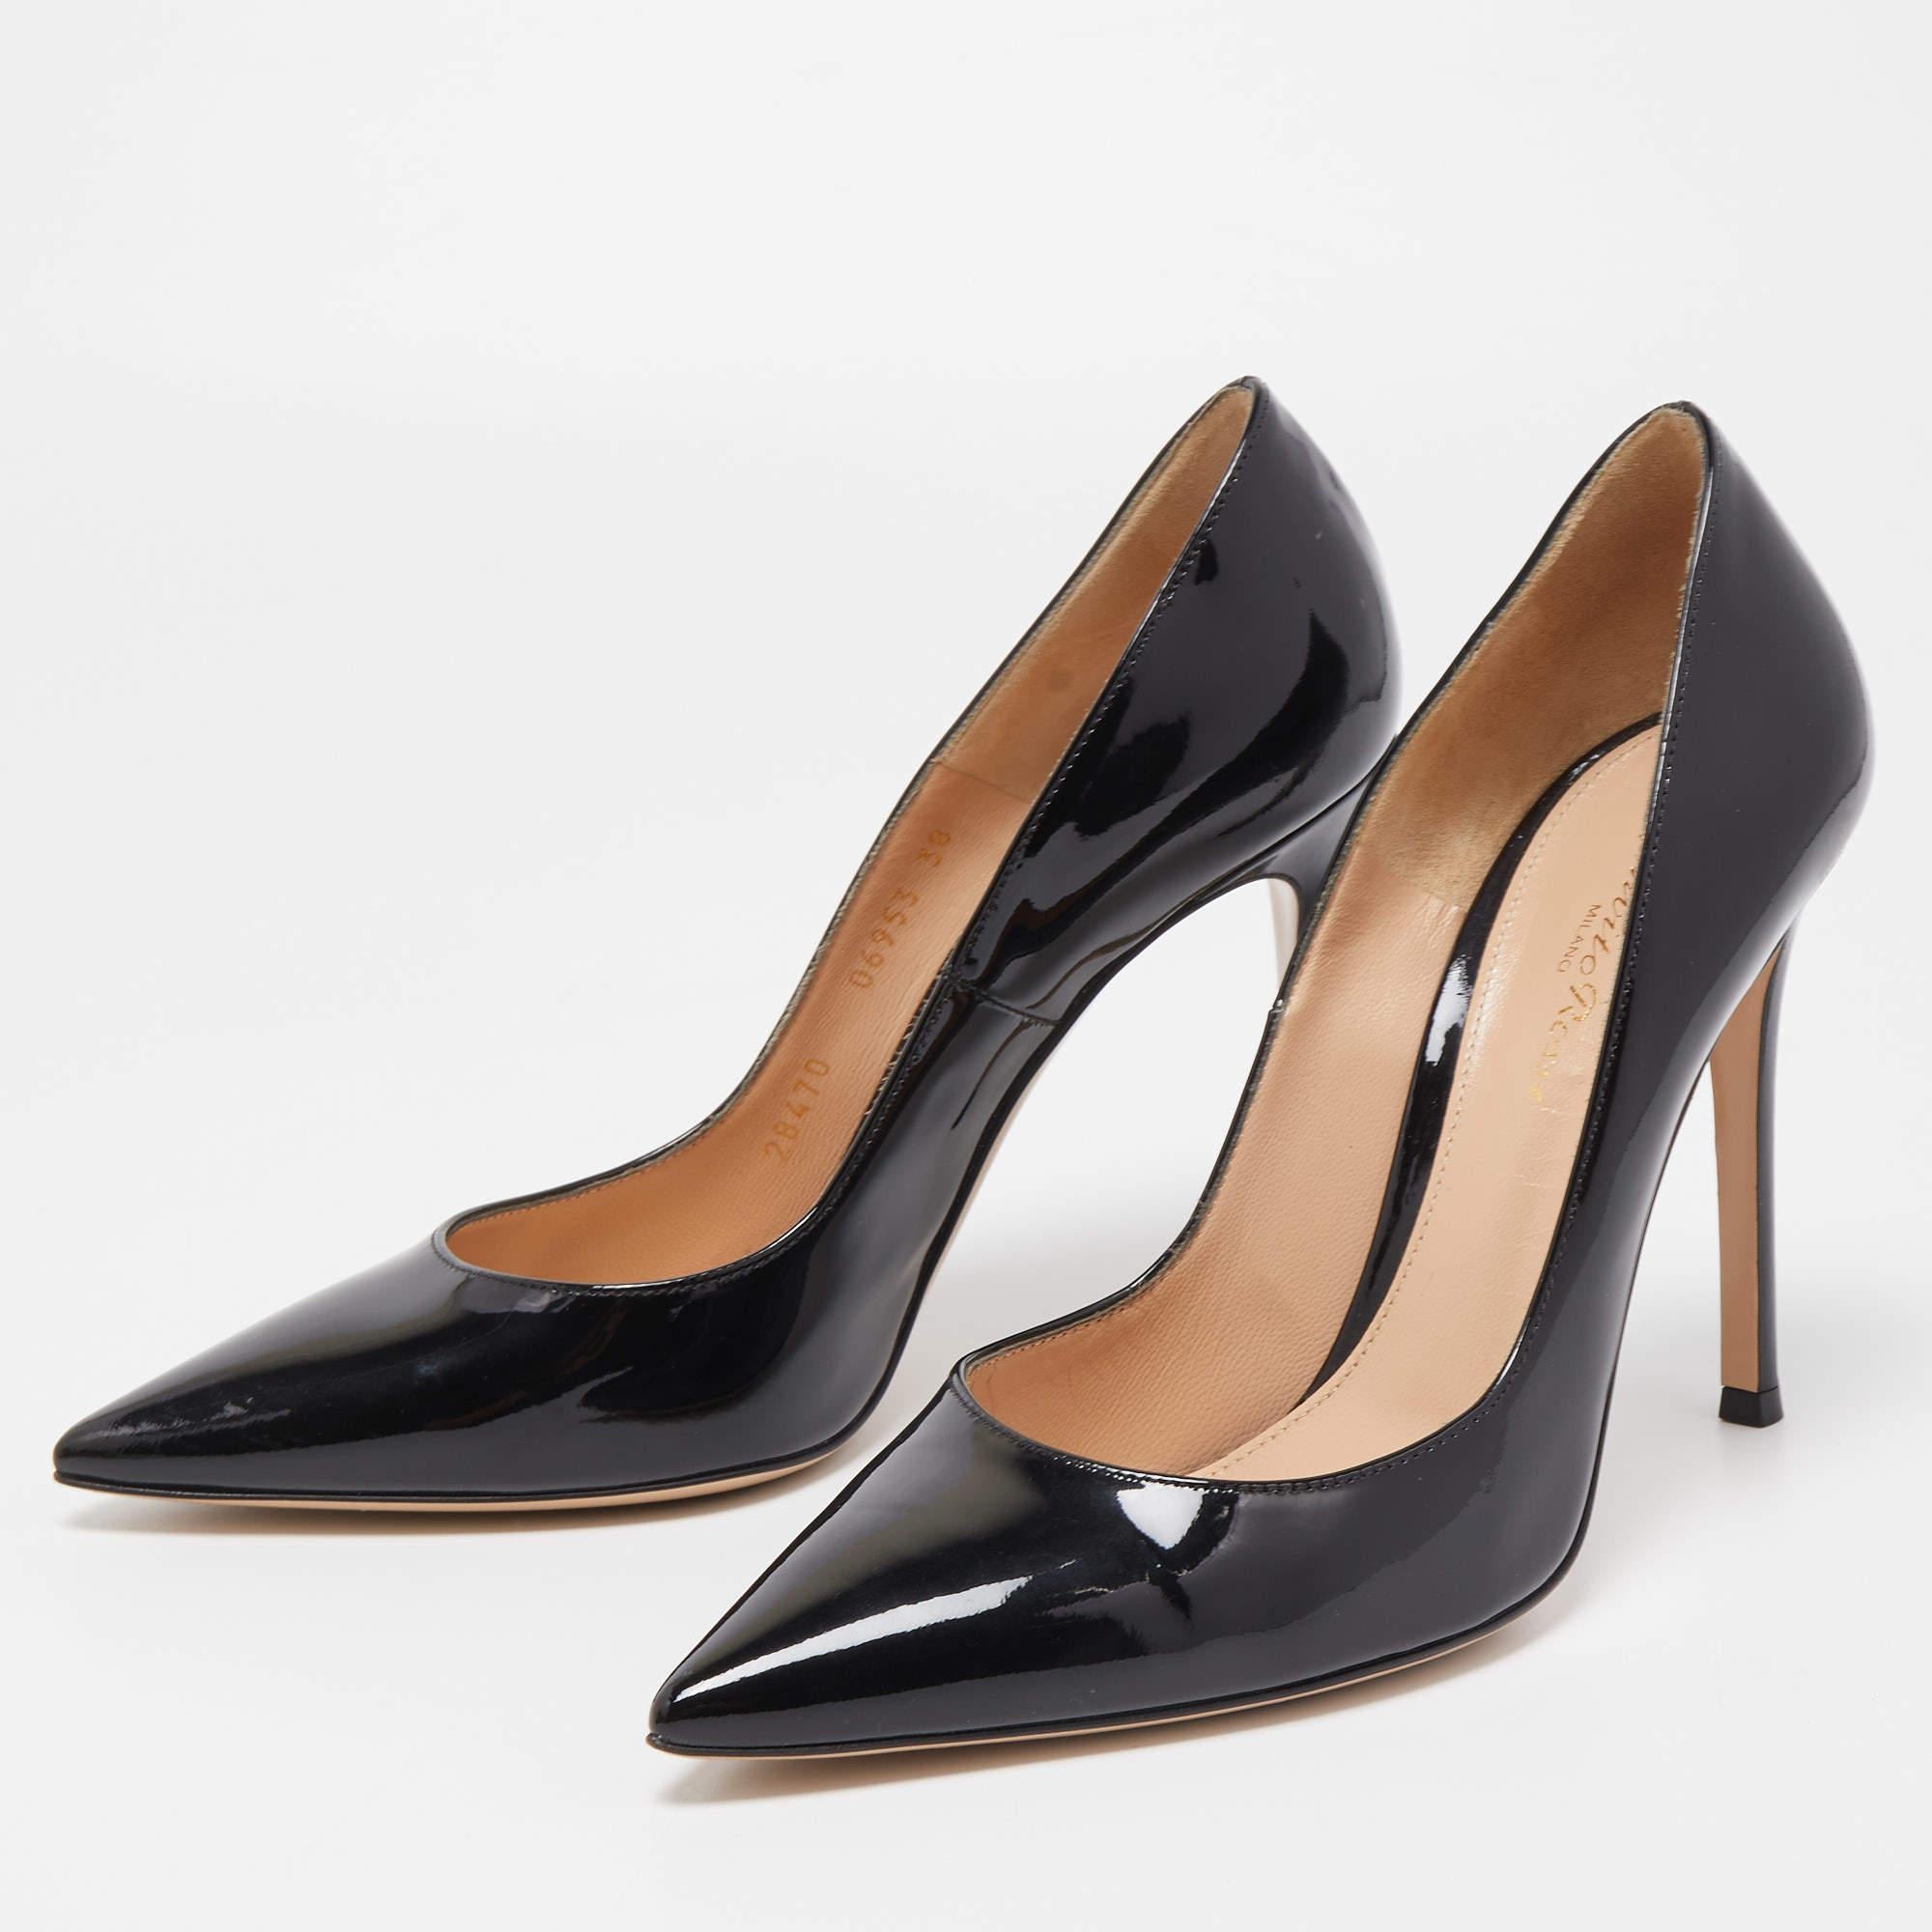 Women's Gianvito Rossi Black Patent Leather Pointed Toe Pumps Size 38